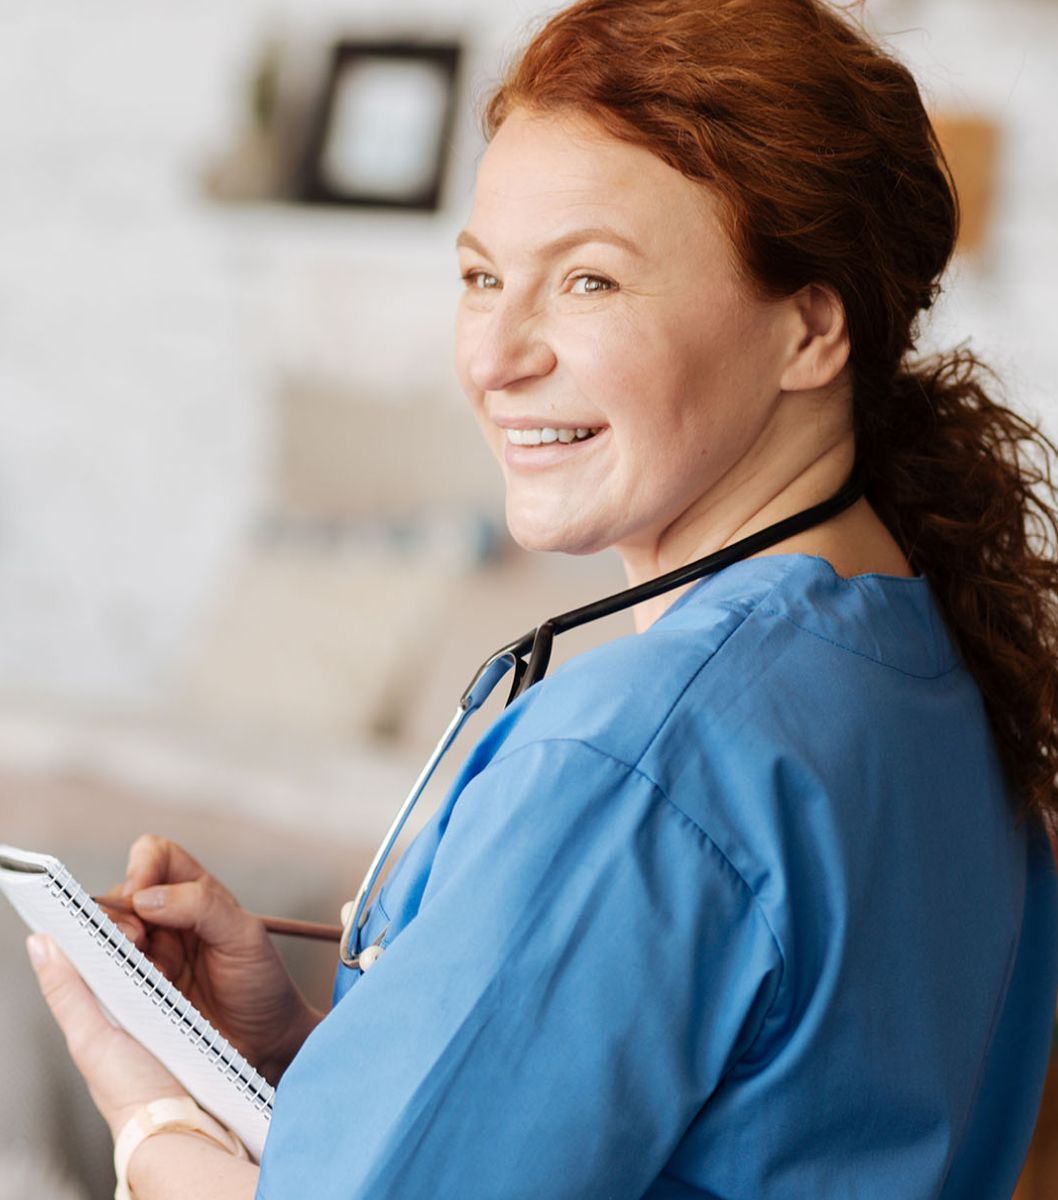 Nurse holding clipboard and smiling, looking off camera.